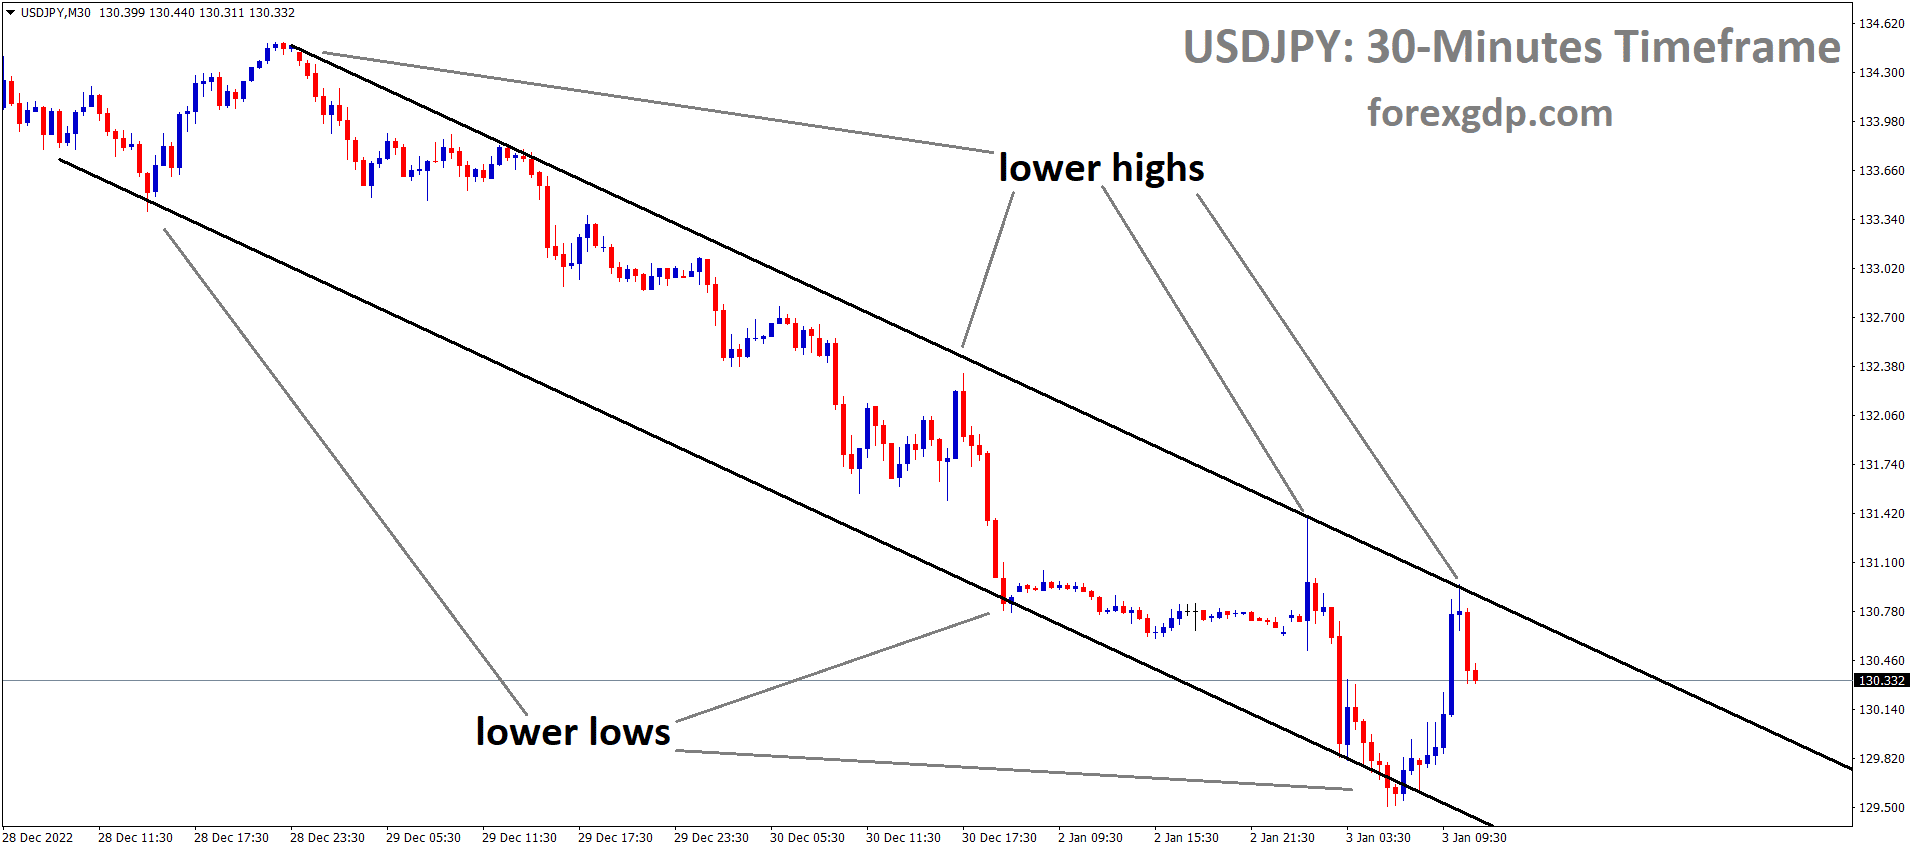 USDJPY is moving in the Descending channel and the market has fallen from the lower high area of the channel